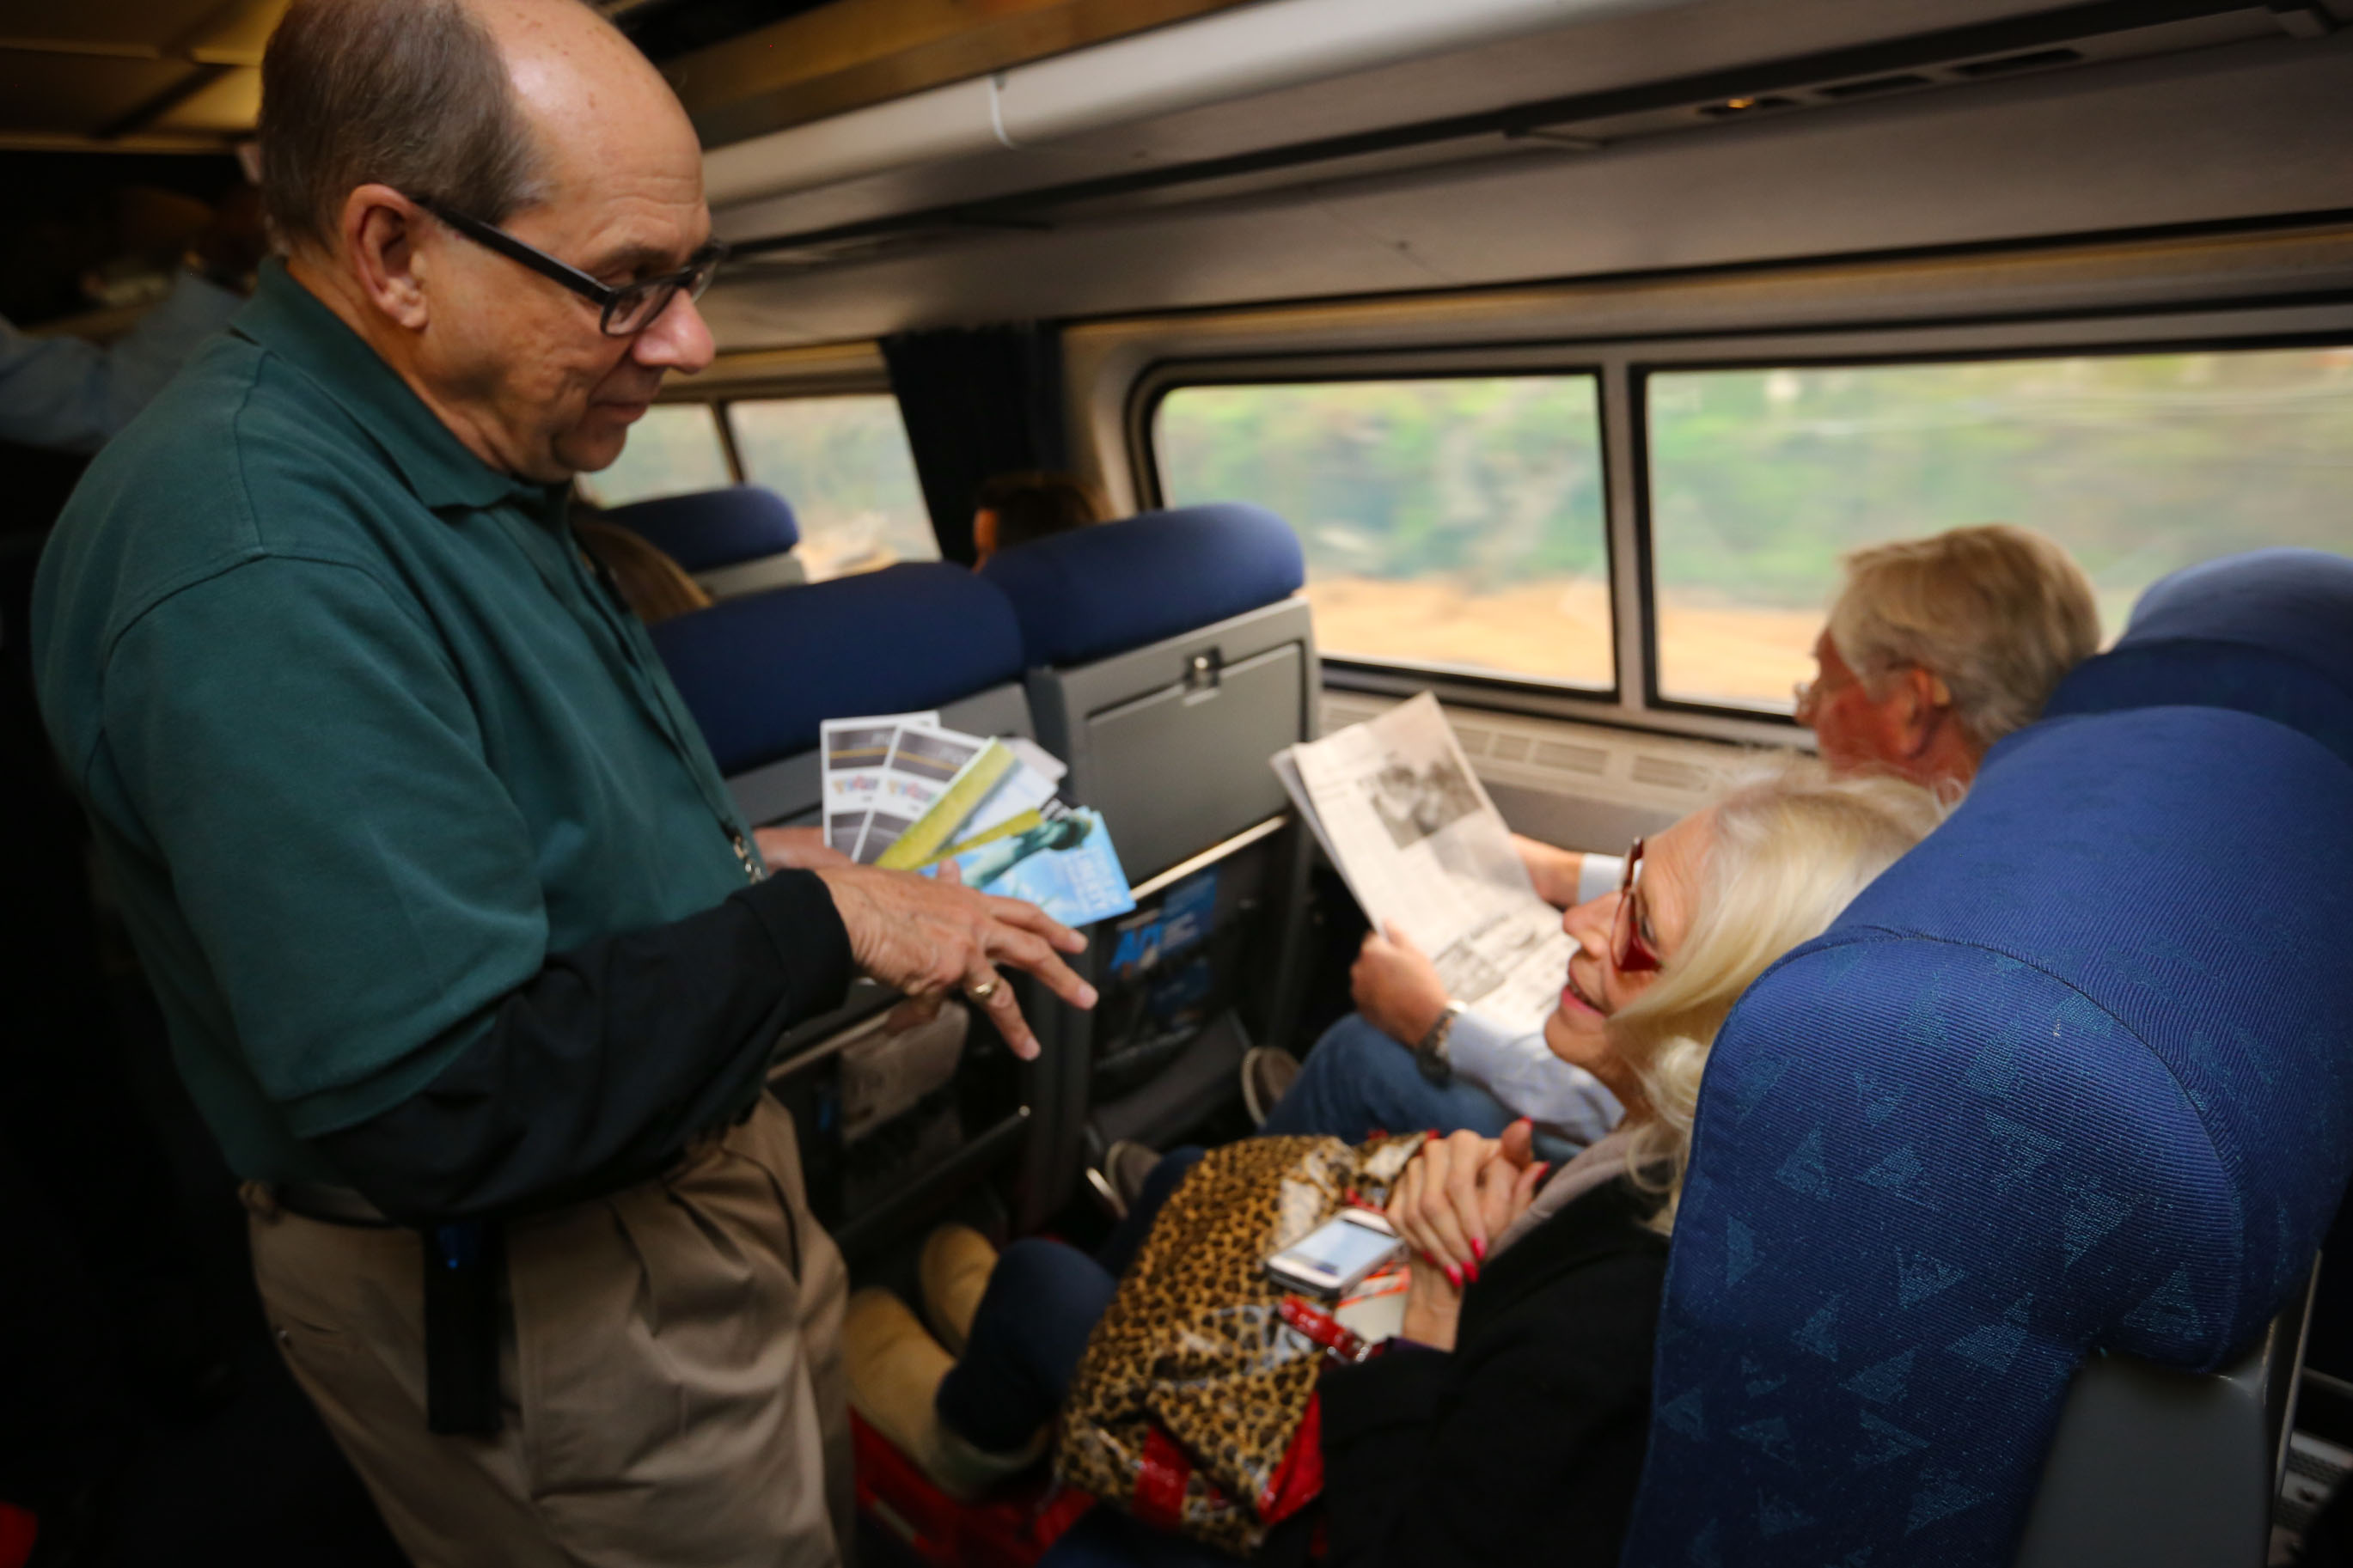 A volunteer talking with train passengers